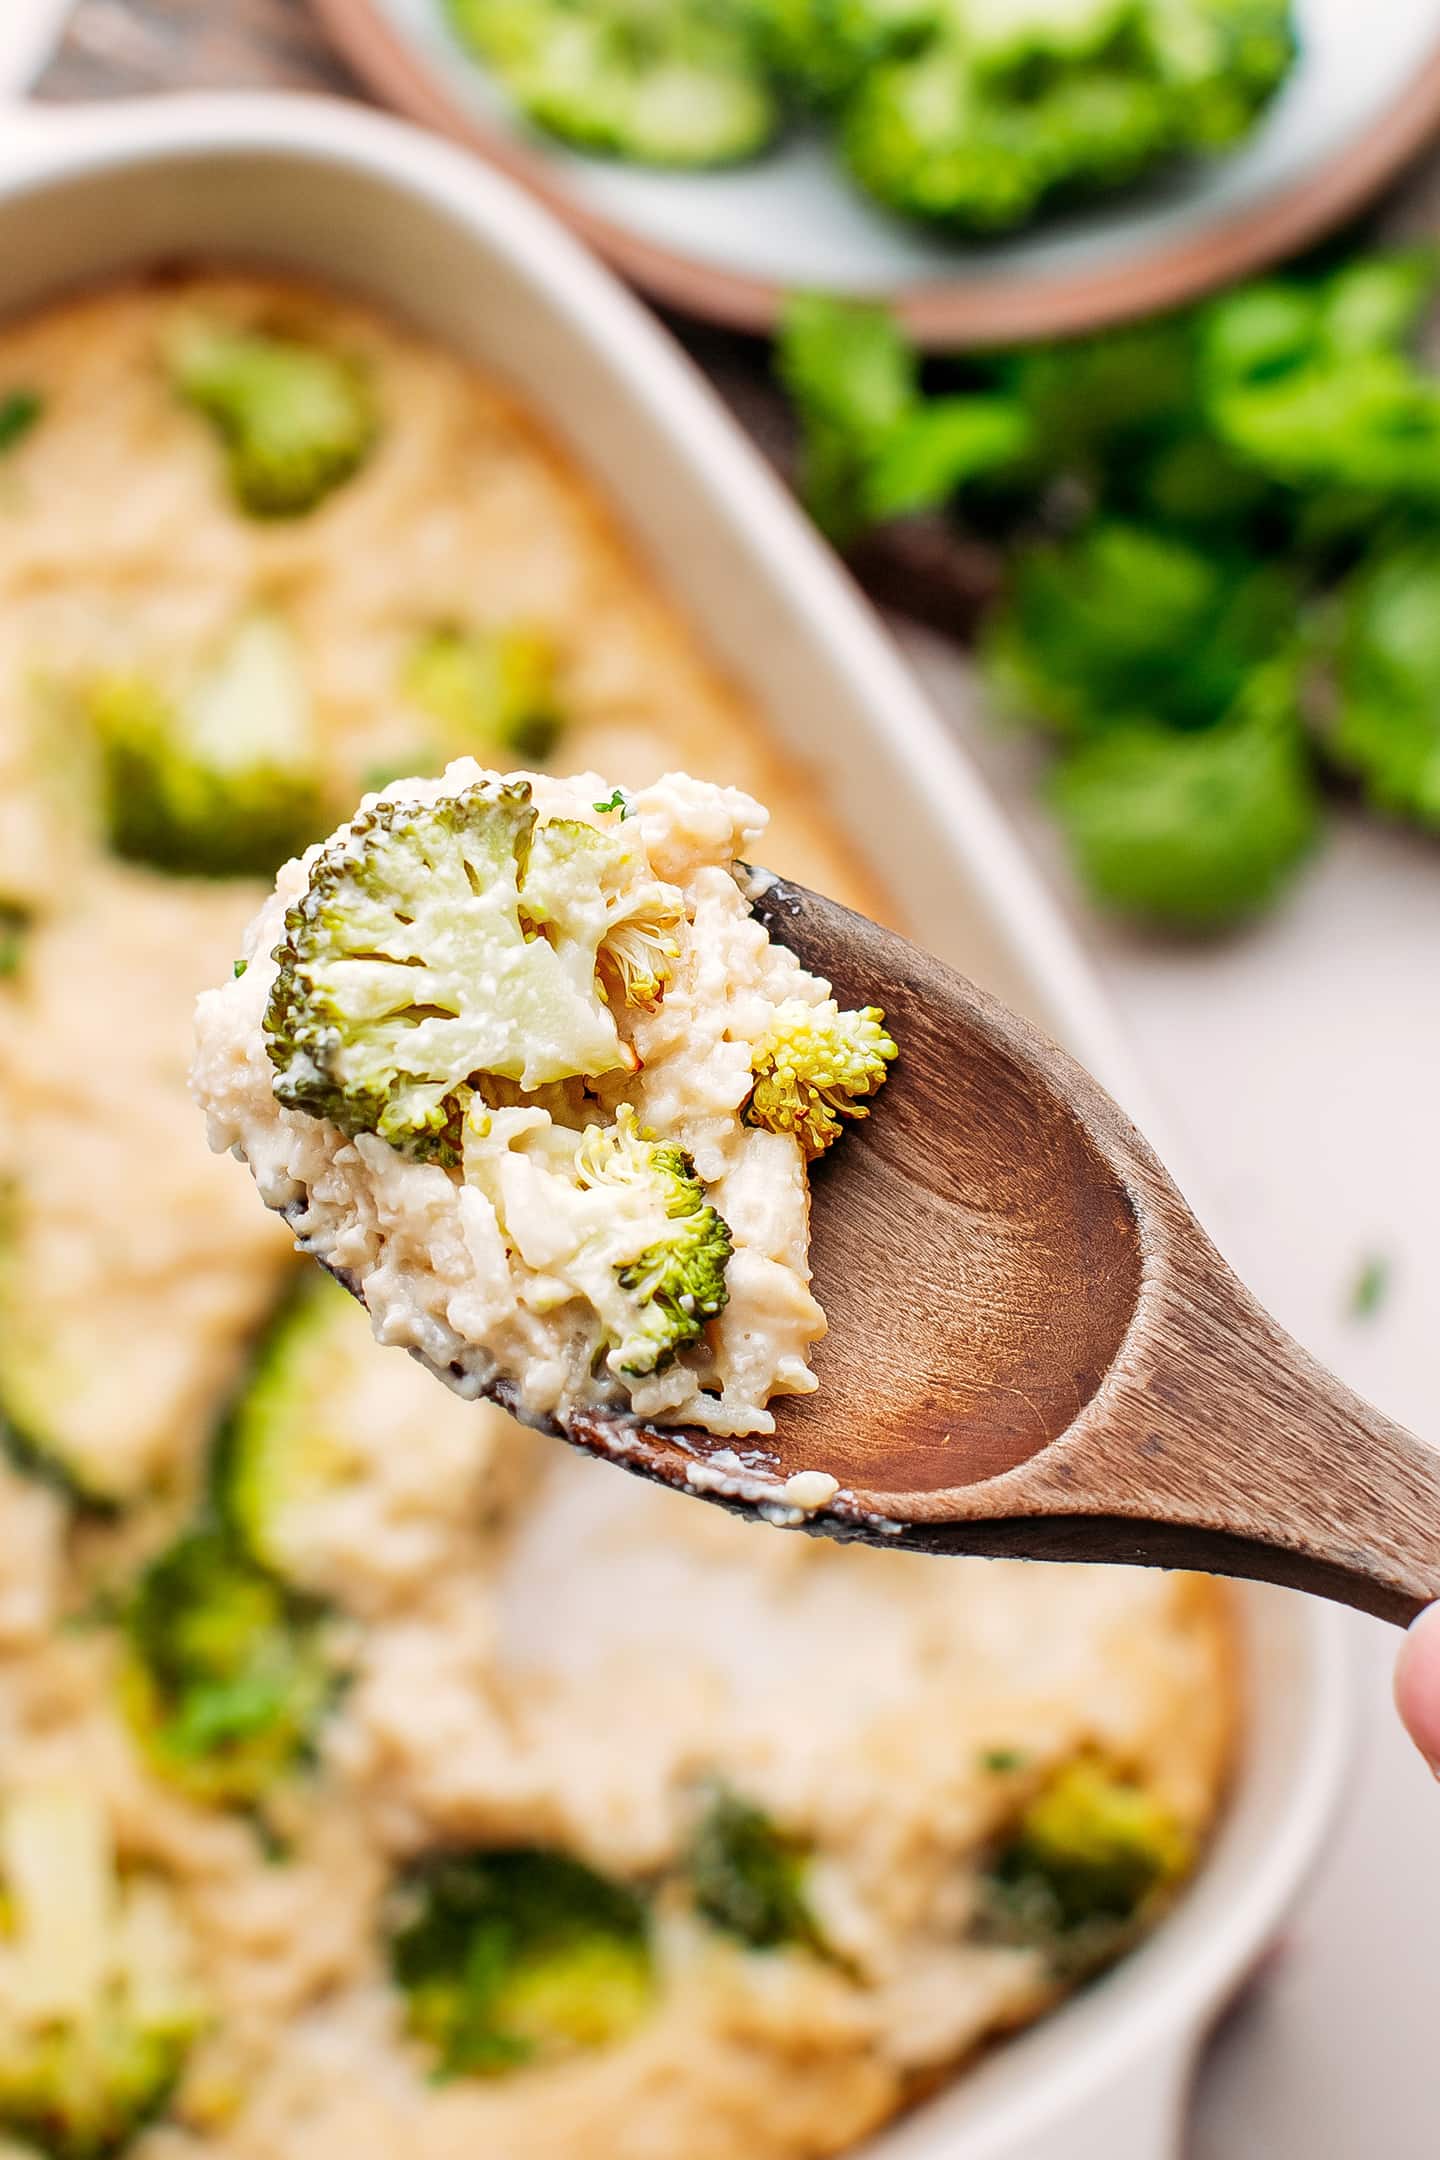 Spoonful of rice and broccoli.